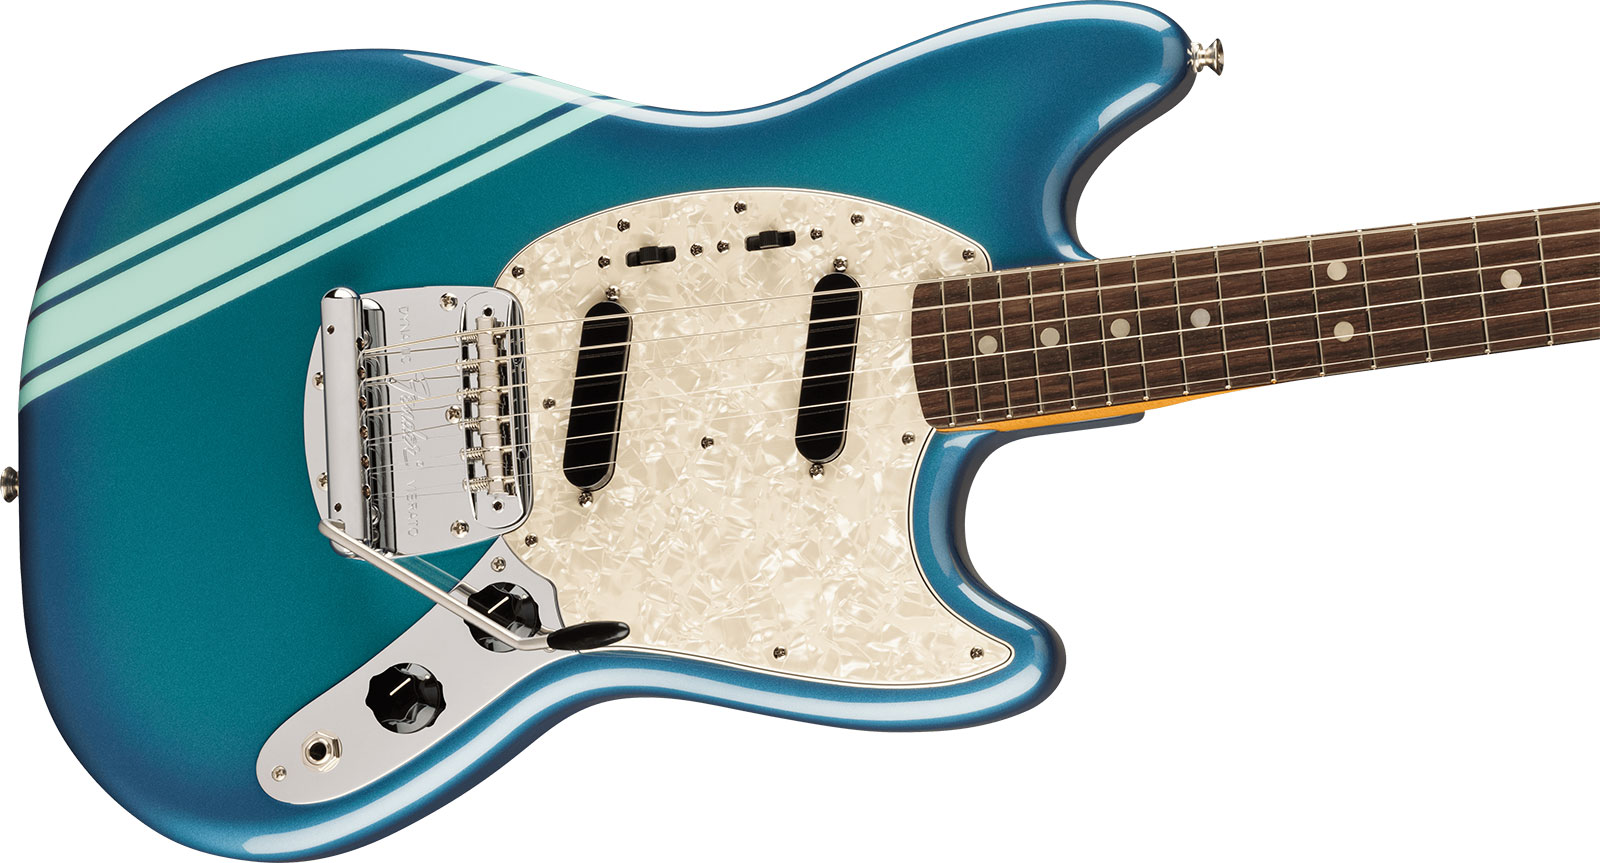 Fender Mustang 70s Competition Vintera 2 Mex 2s Trem Rw - Competition Blue - Guitarra electrica retro rock - Variation 2